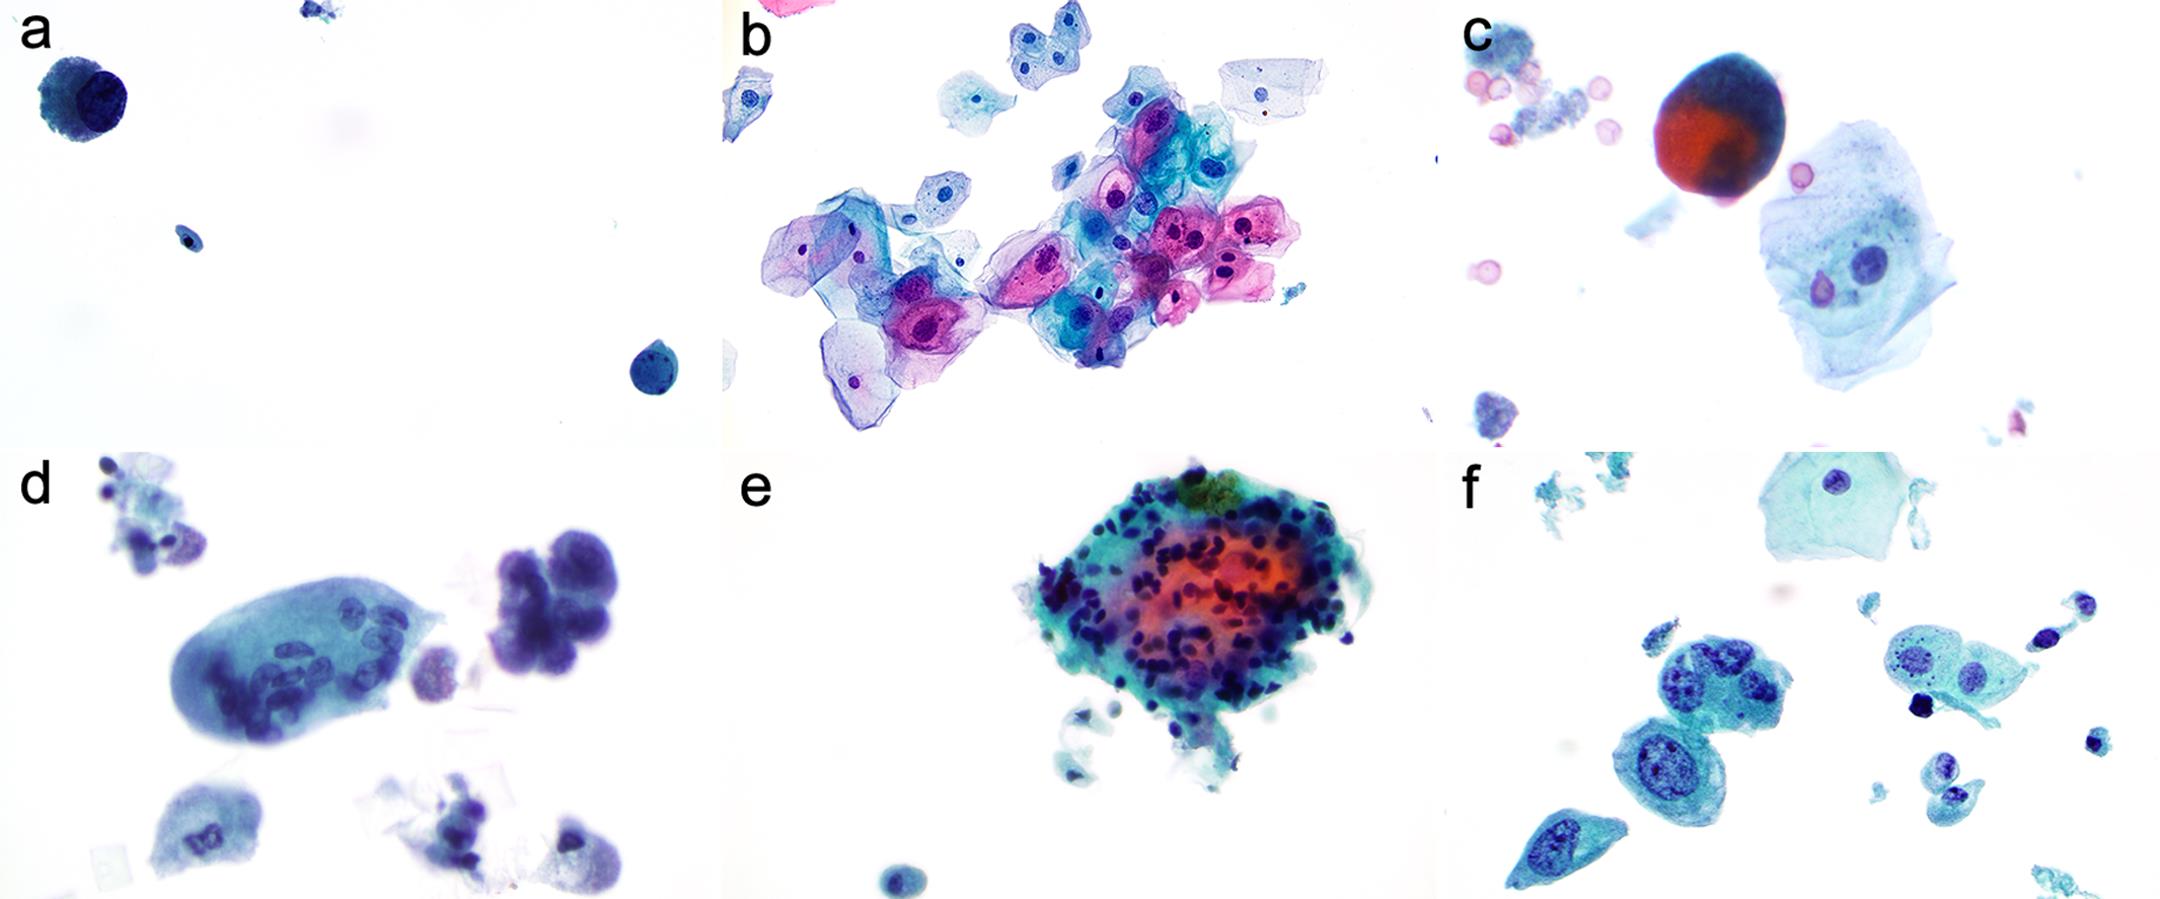 Virus cytopathic effects. Polyoma virus-infected epithelial cells present with a large, ground-glass-like intranuclear viral inclusion (a). HPV-infected squamous cells present with hyperchromatic nuclei, with irregular nuclear membranes and perinuclear halos (b). Radiation effects: Affected cells present with cytomegaly, nucleomegaly, multinucleation, nuclear vacuoles, cytoplasmic polychromasia, and preserved N/C ratios (c). BCG effects: Reactive urothelial cells, multinucleated giant cells (d), and granuloma (e). Chemotherapy effects: the mitomycin and thiotepa caused the nuclear enlargement, multinucleation, and hyperchromasia of superficial cells (f).